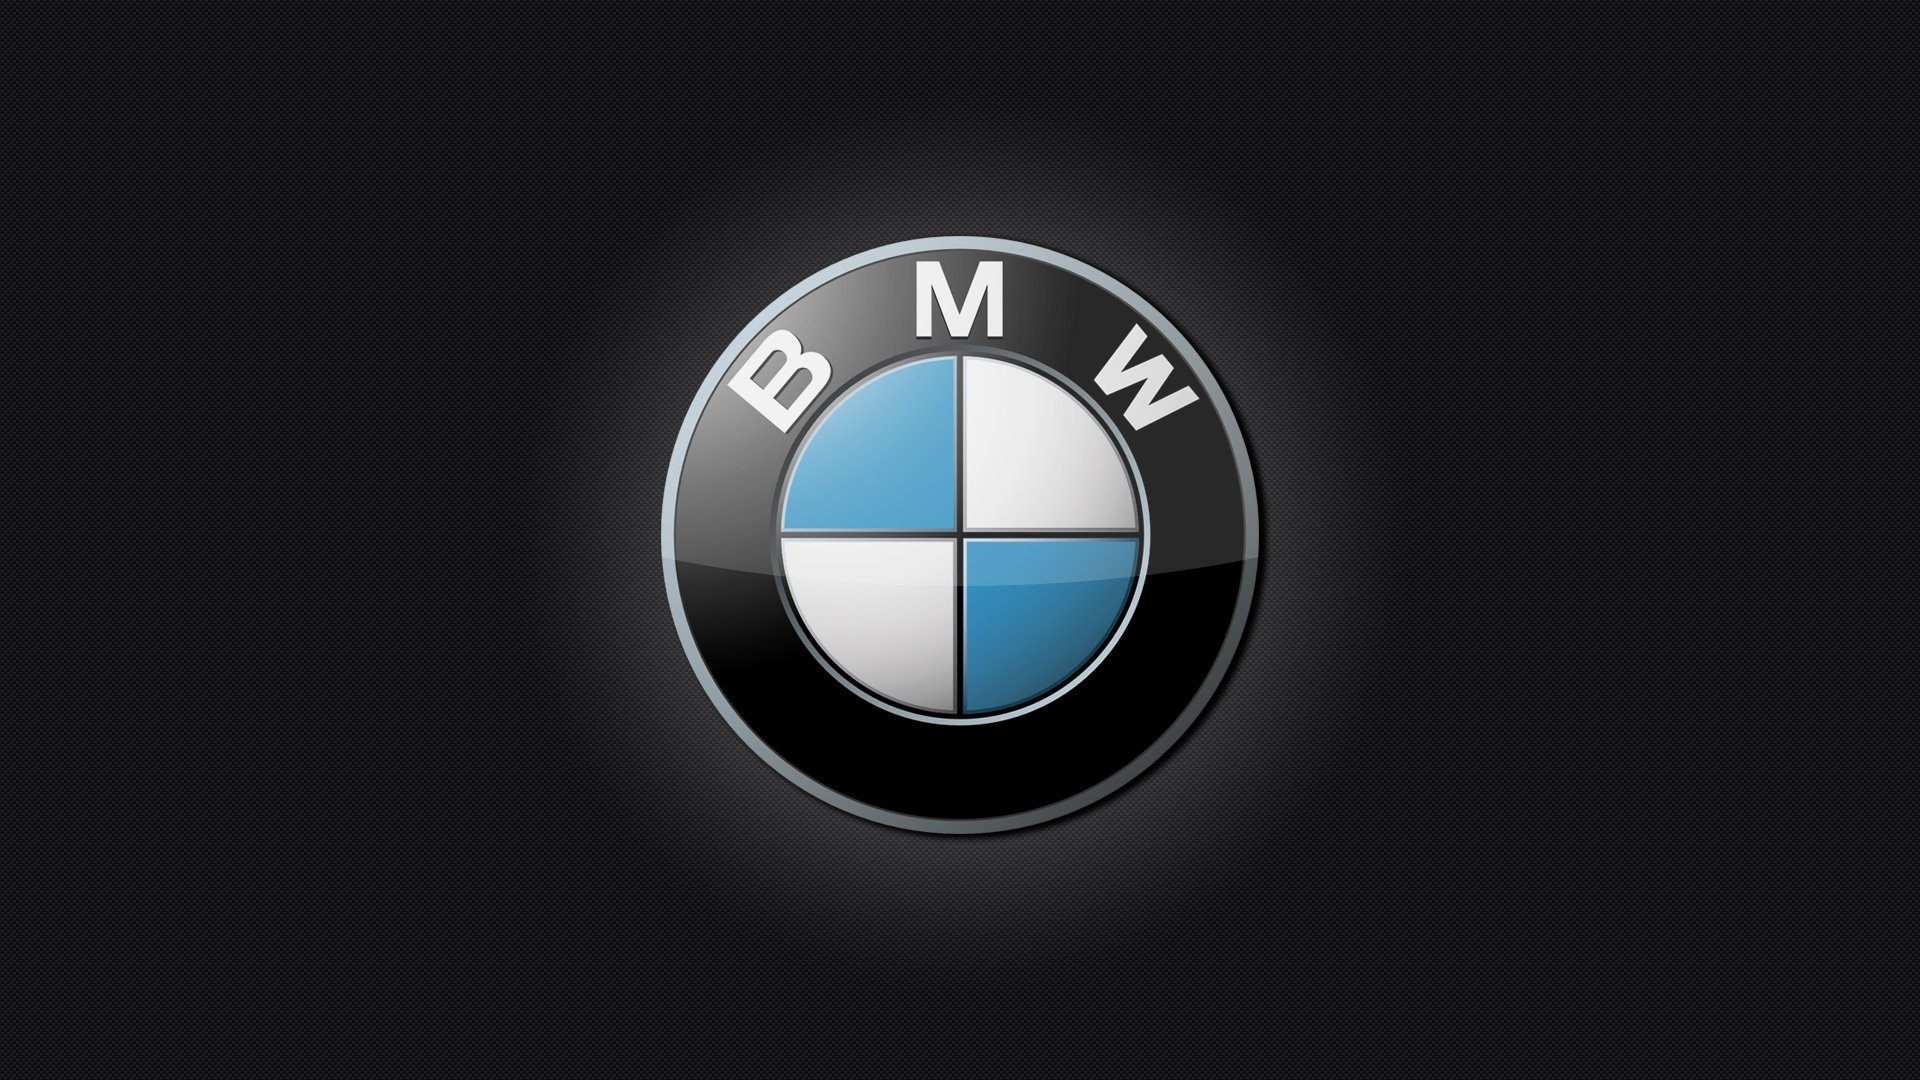 BMW Logo Wallpapers - Top 21 Best BMW Logo Wallpapers [ HQ ]